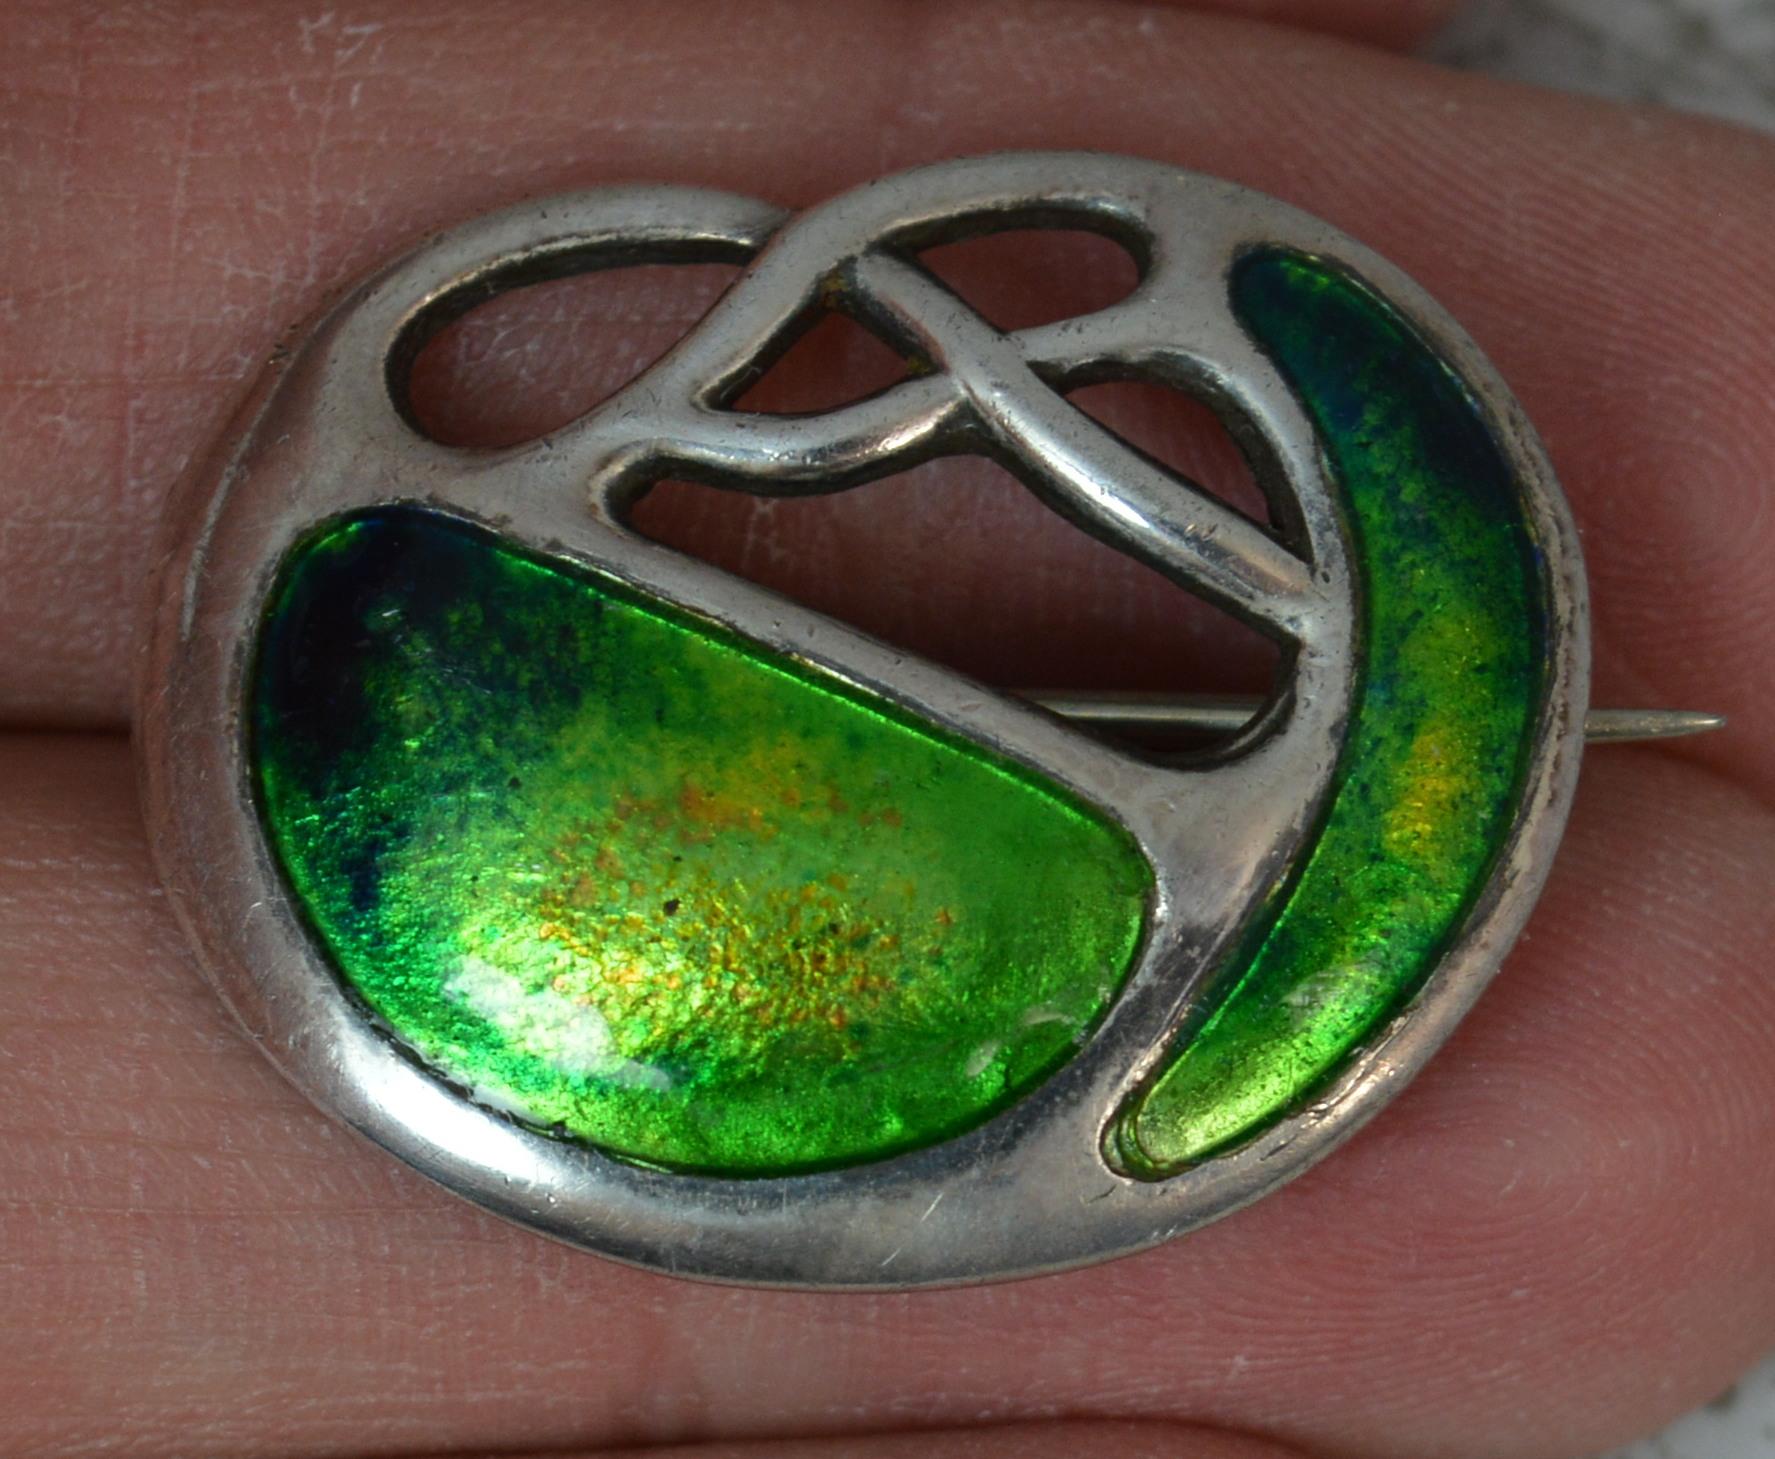 A stunning Chester silver brooch by Charles Horner. Edwardian era, art nouveau in shape and design.
Sterling silver with vivid green and blue enamelling.
Hallmarks ; C.H Chester assay, date letter H, lion
Weight ; 5.5 grams
Size ; 28mm x 23mm